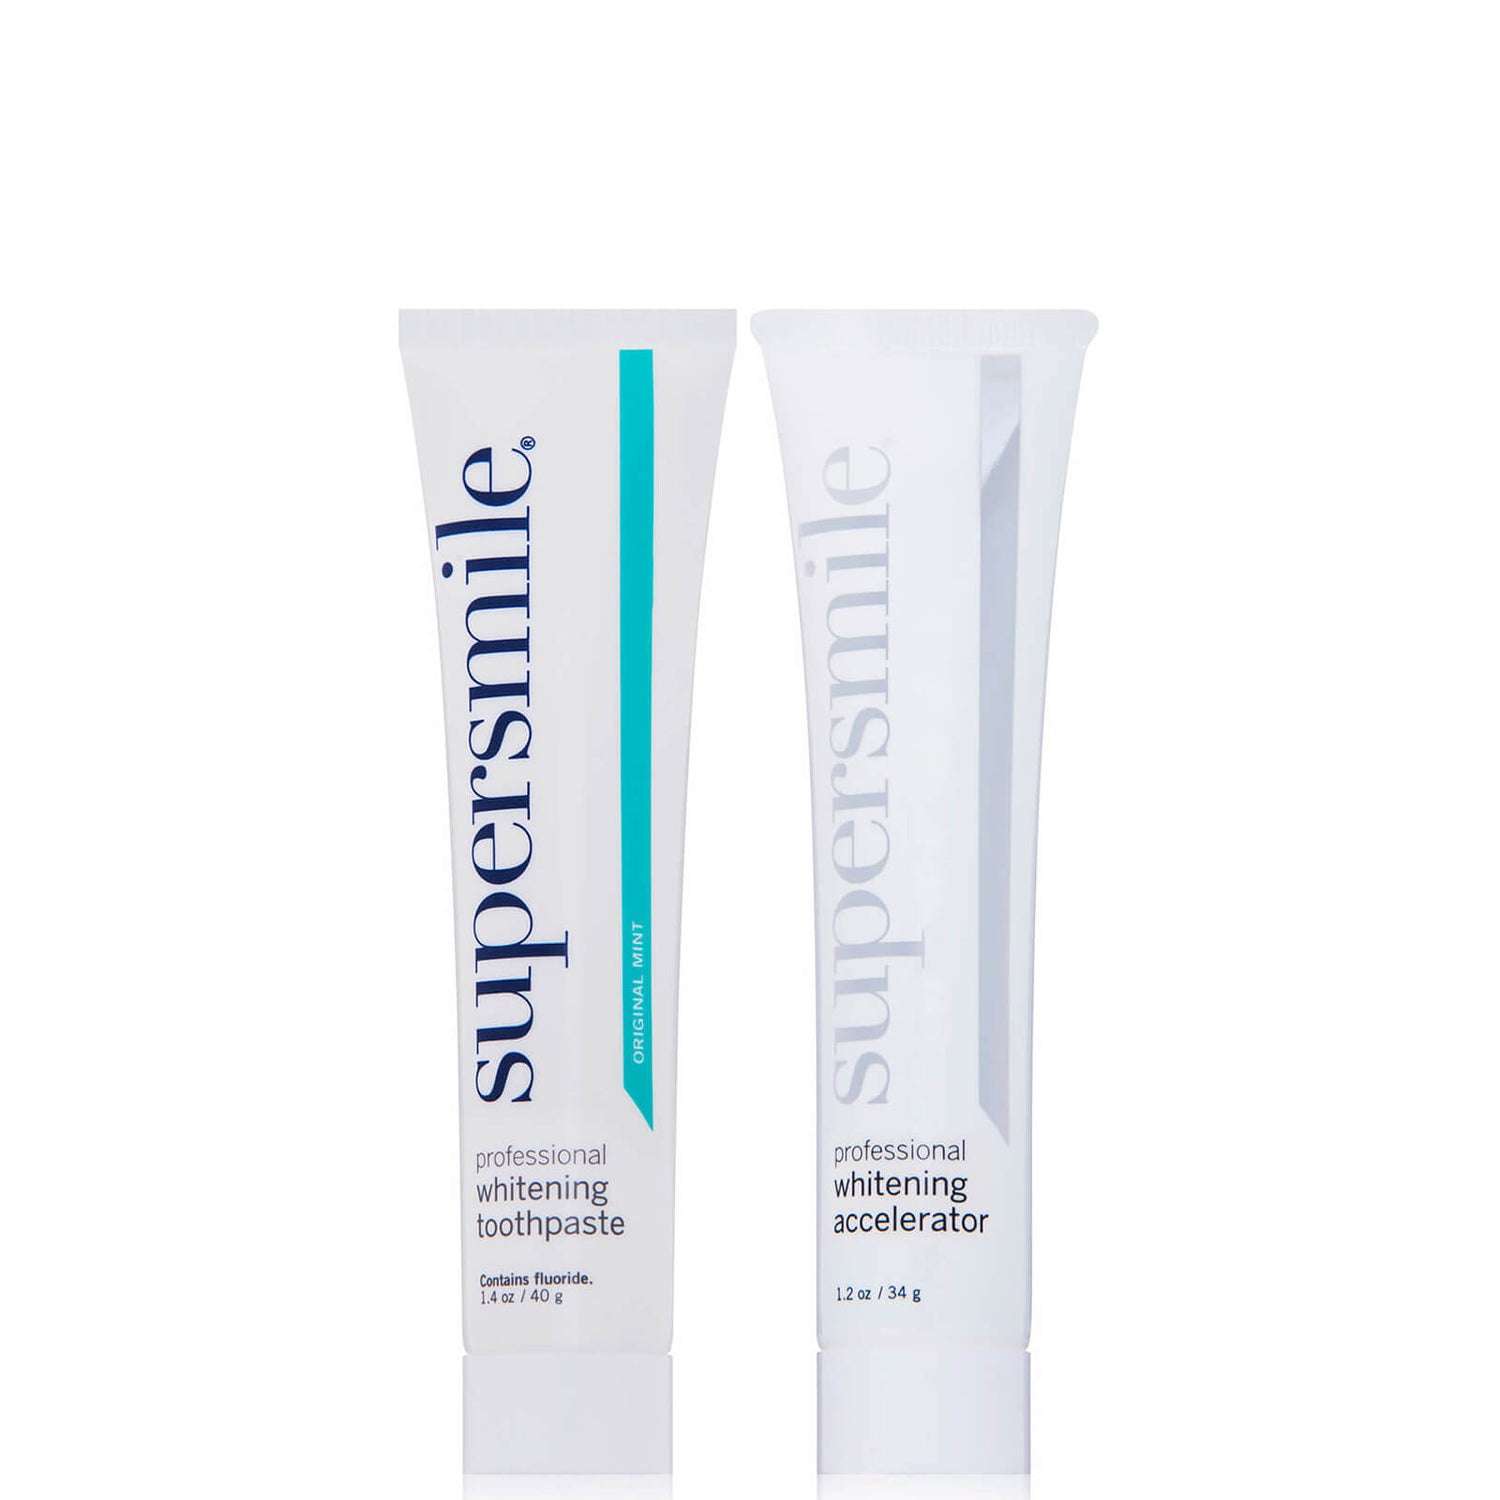 Supersmile Professional Whitening System - Small - Original Mint (2 piece)